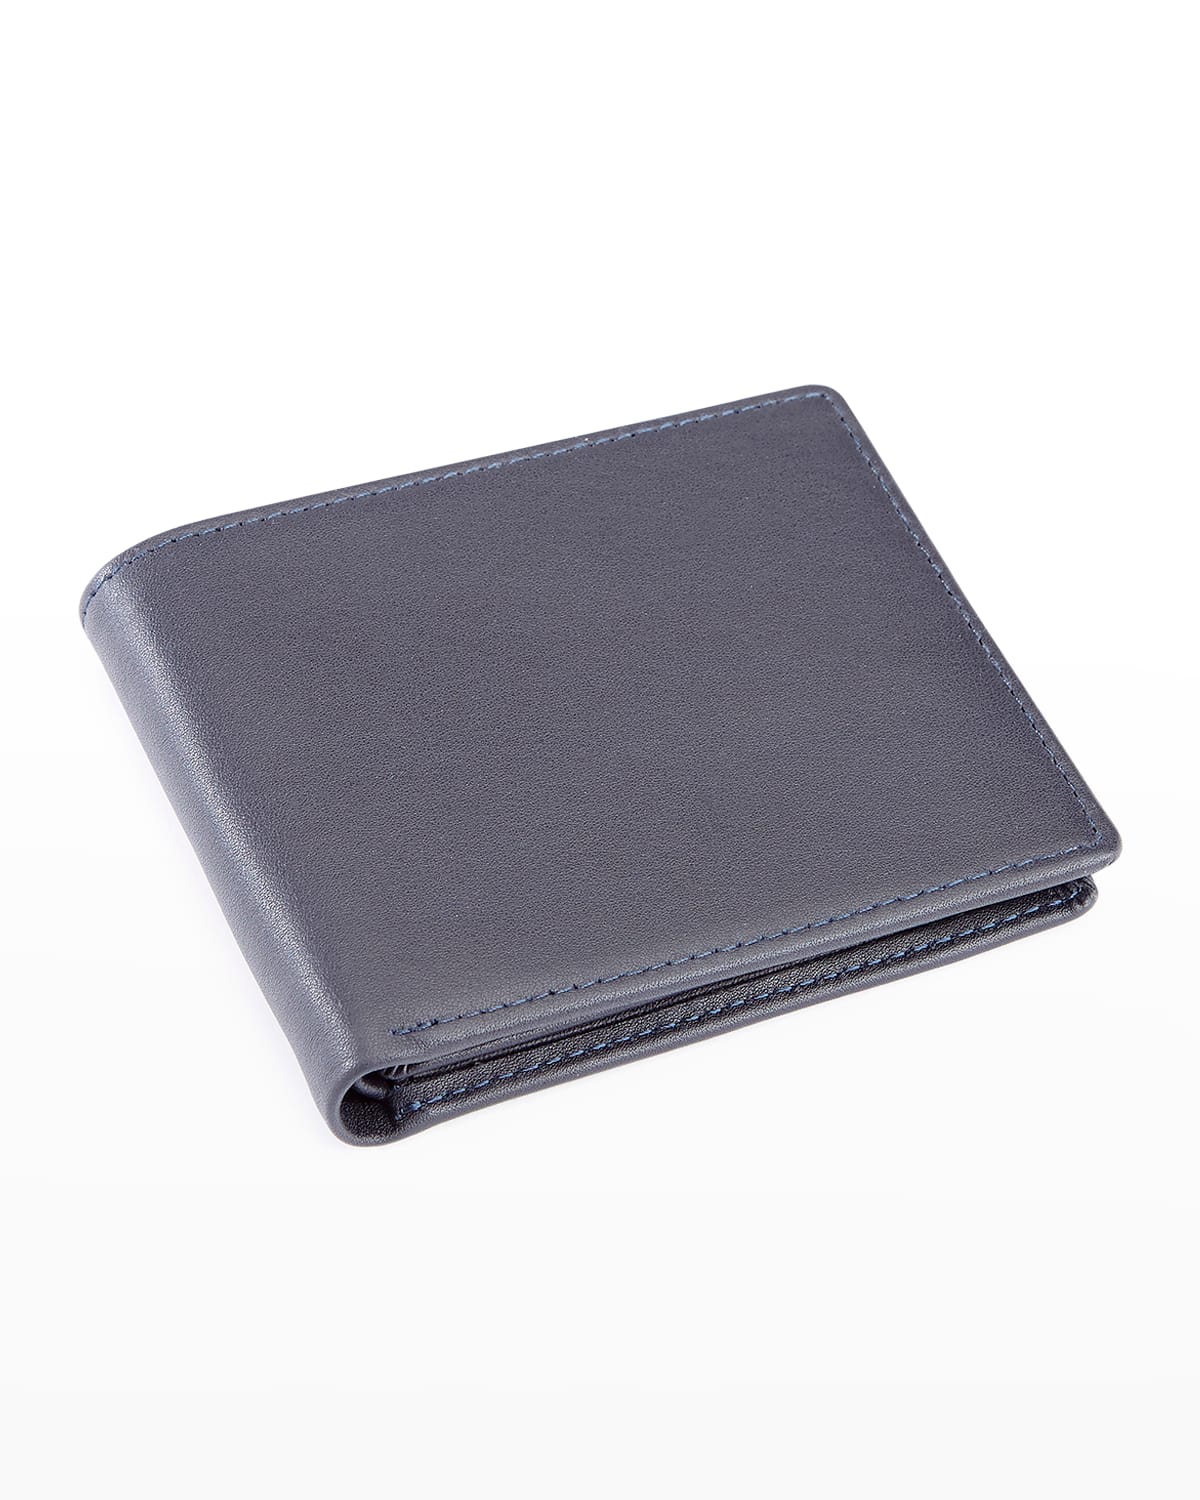 Royce New York Personalized Leather Rfid-blocking Trifold Wallet In Navy Blue